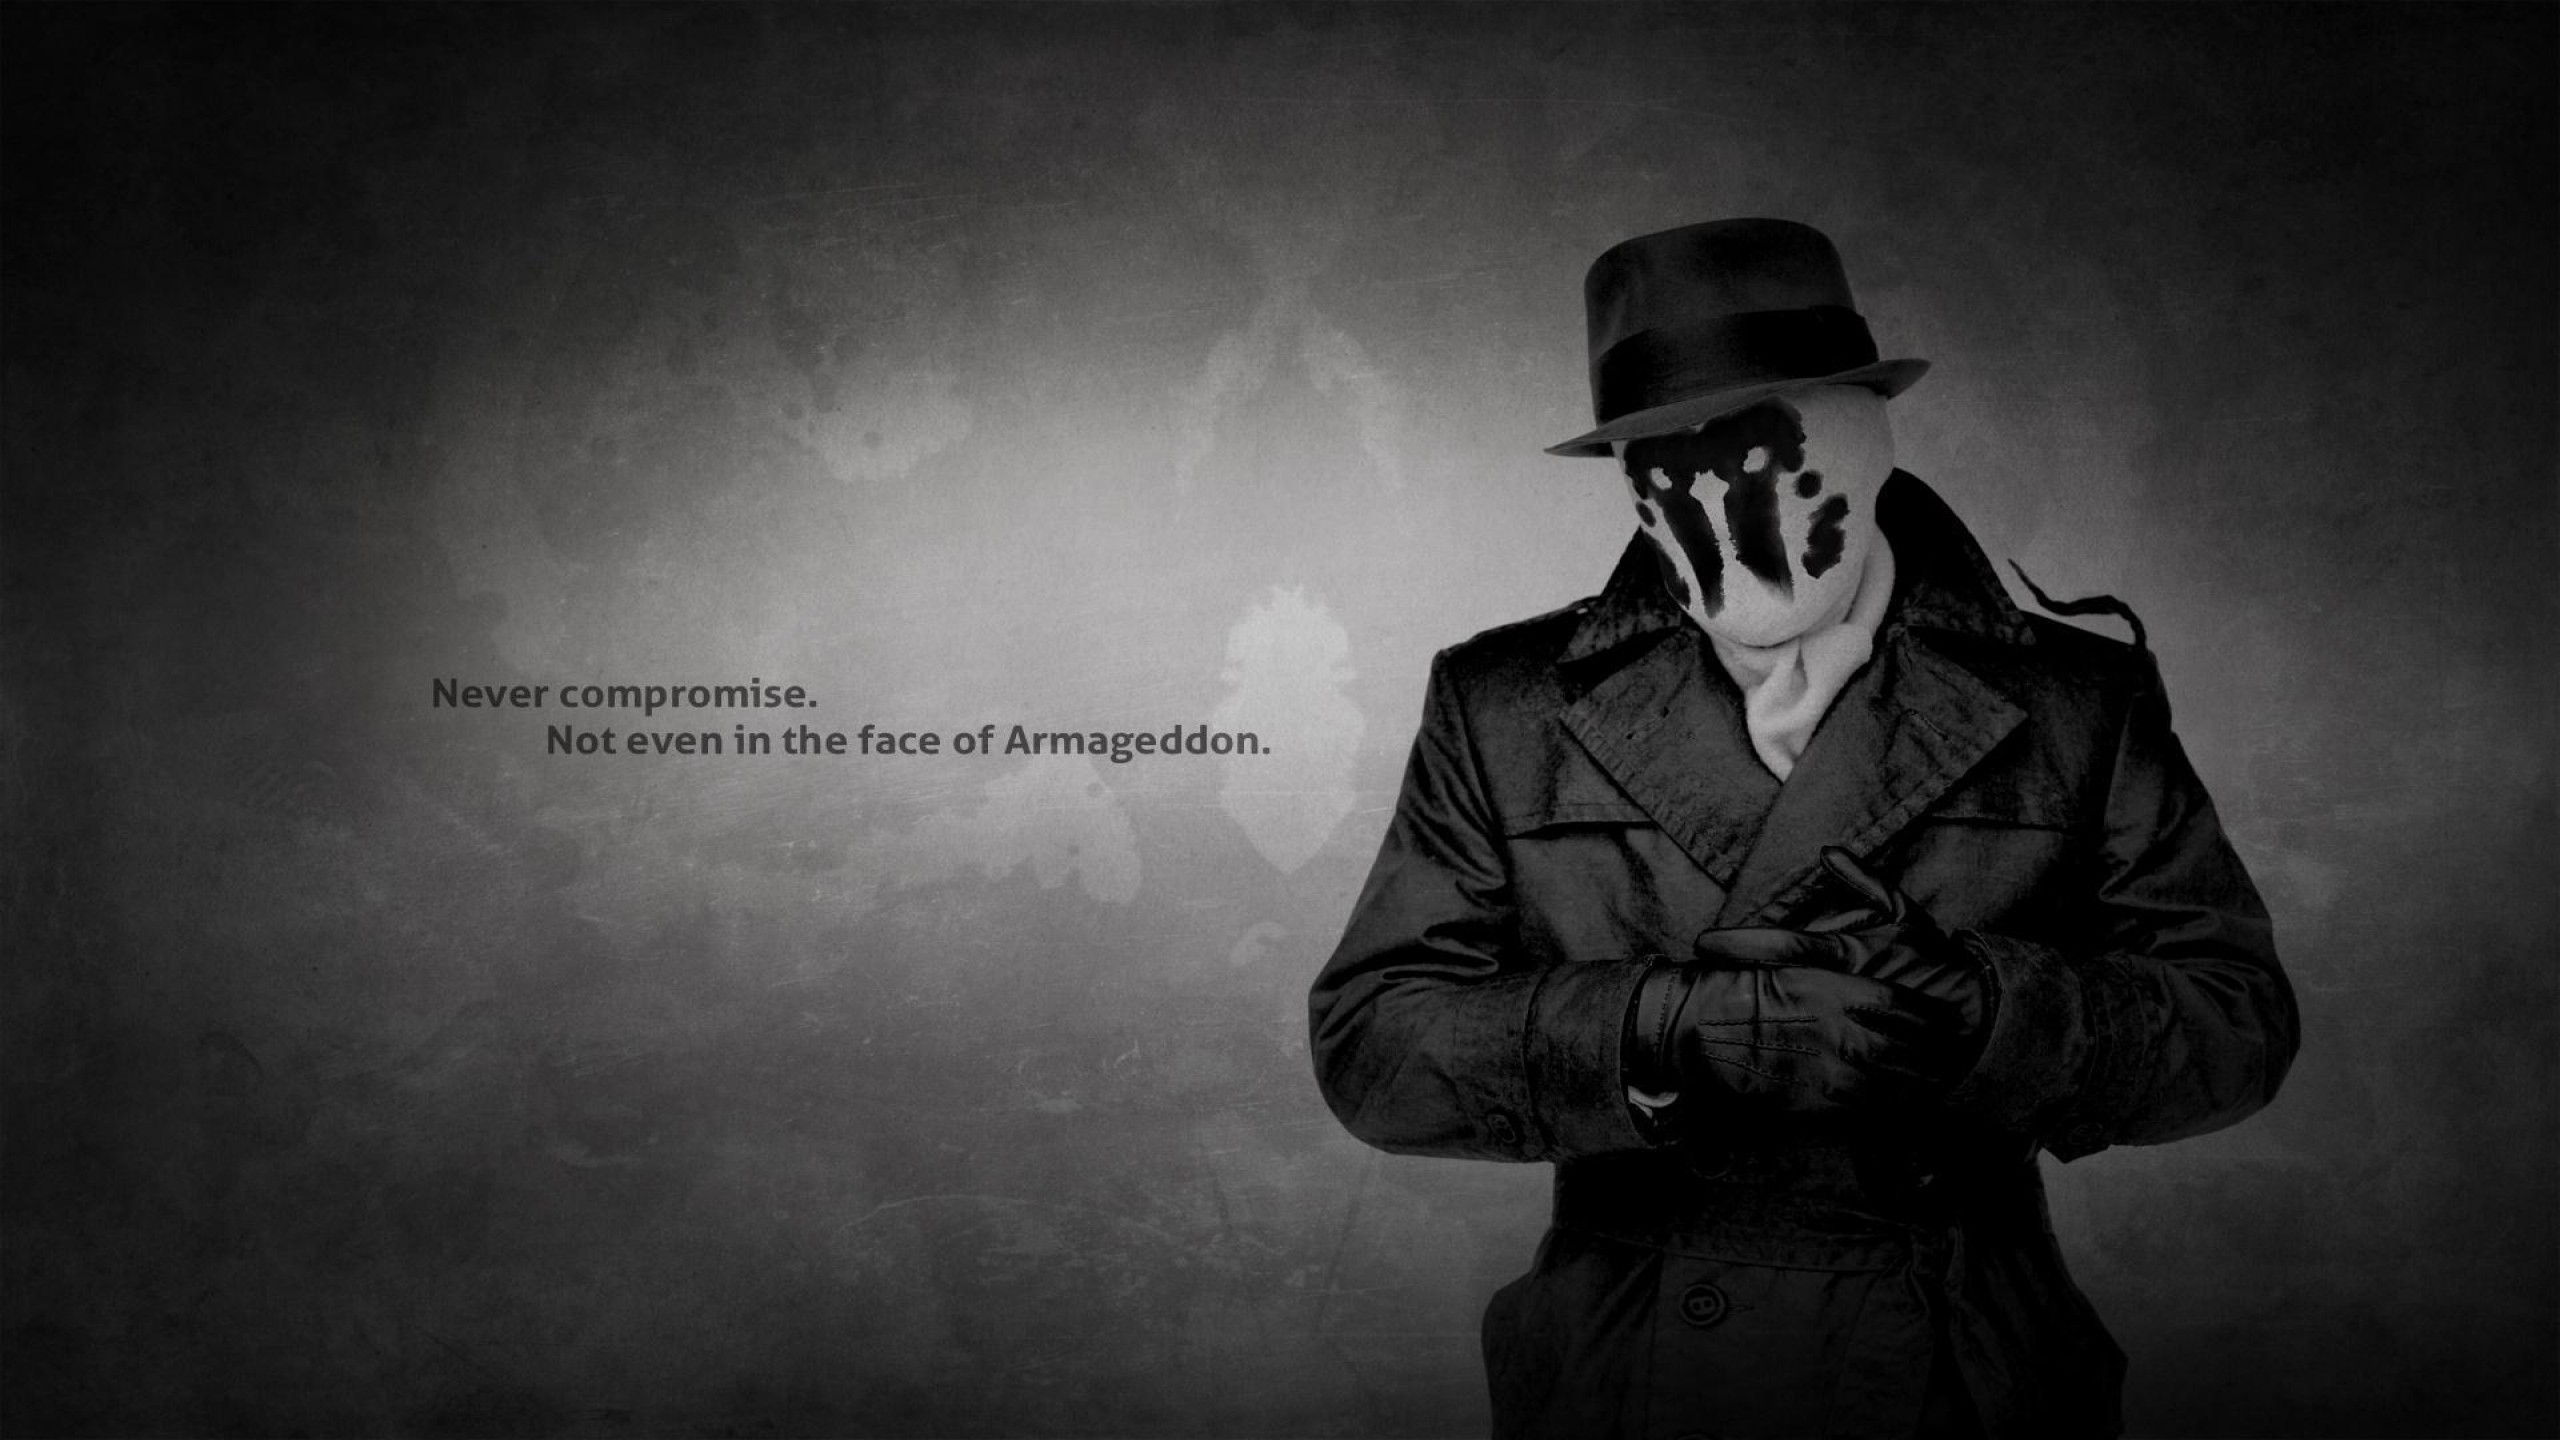 2560x1440 Search Results for “watchmen quote wallpaper” – Adorable Wallpapers